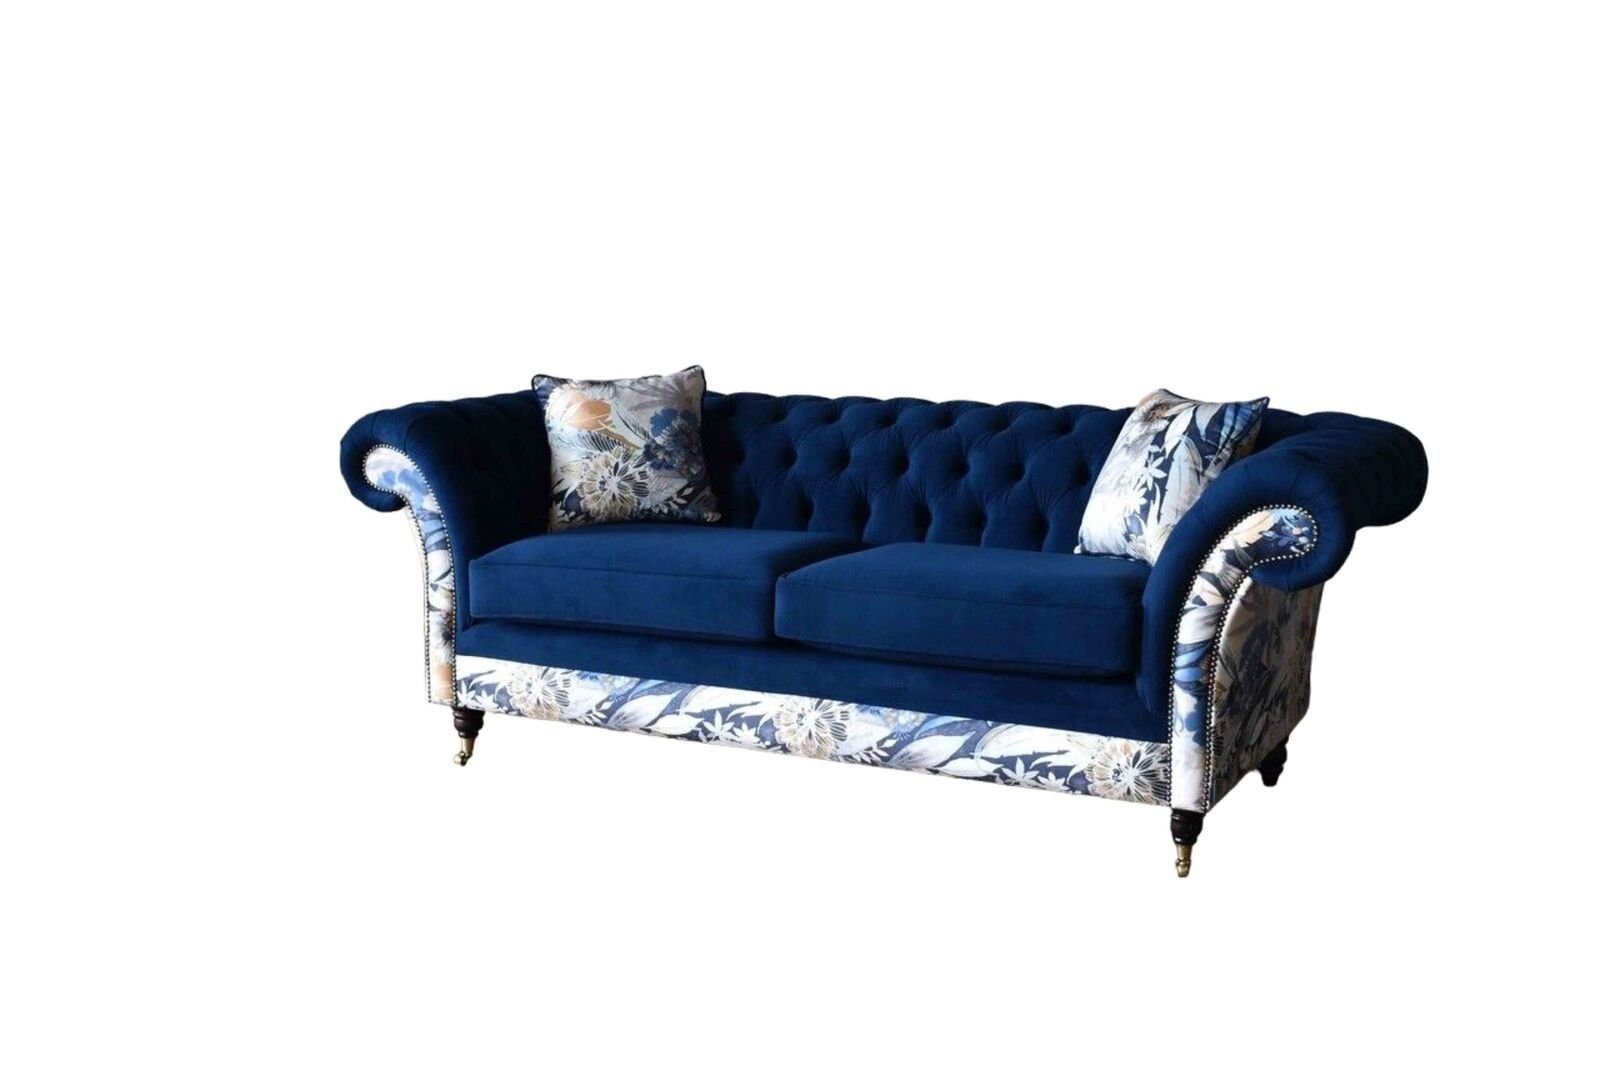 JVmoebel Sofa Europe Royal Lounge Blauer Couch Chesterfield Polster Made Sofas, in Samt Sitz